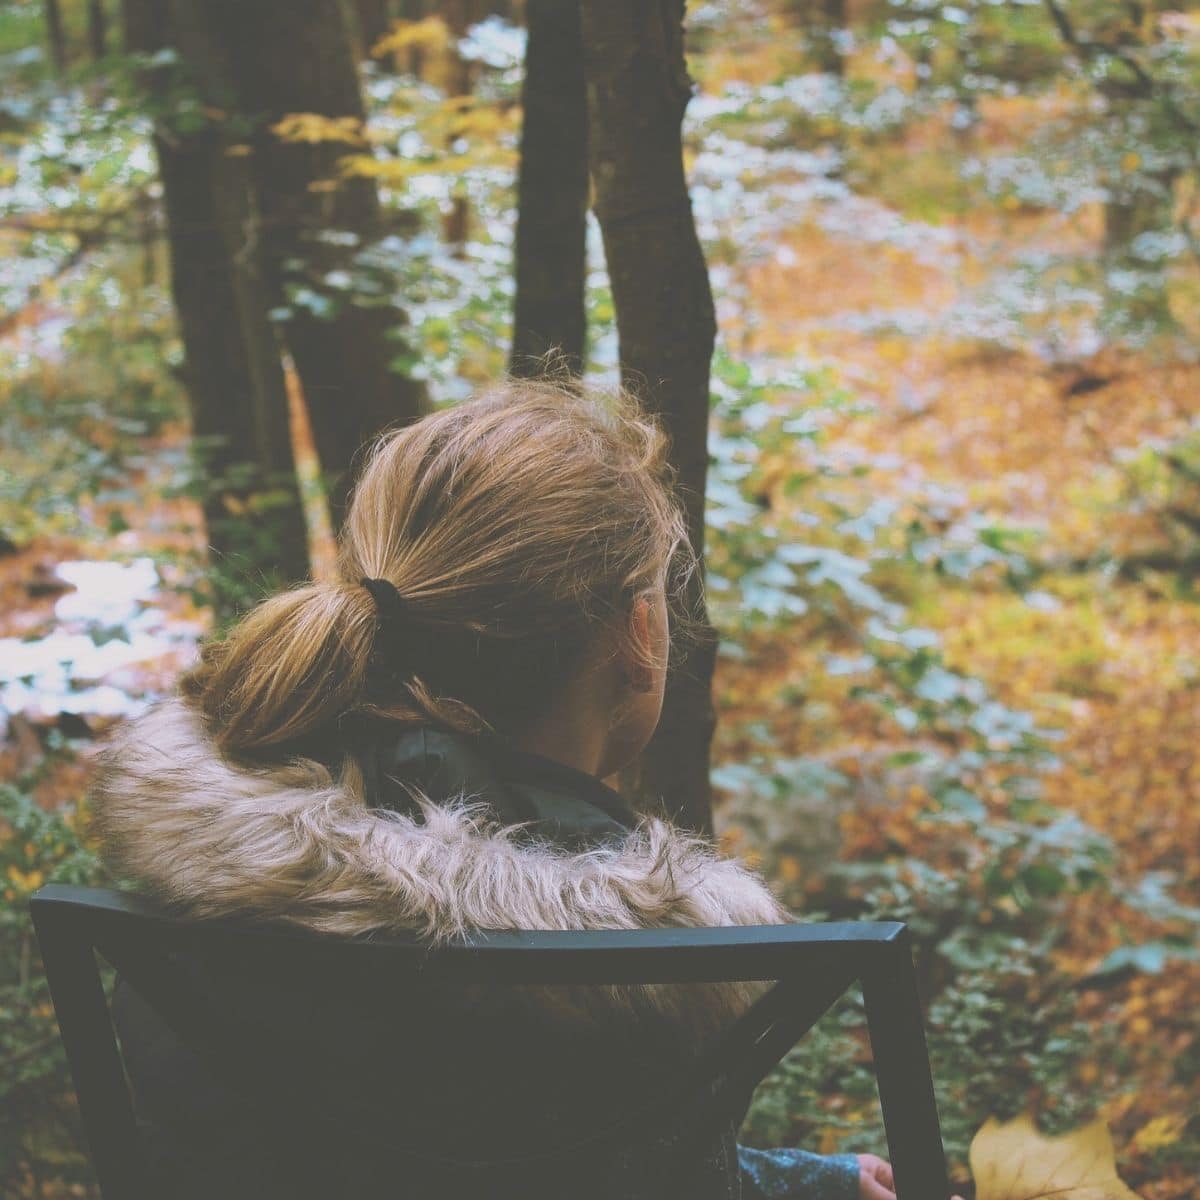 Woman struggling with Autumn Blues, sitting on a chair outside with a winter coat on, looking into the woods full of fall leaves.